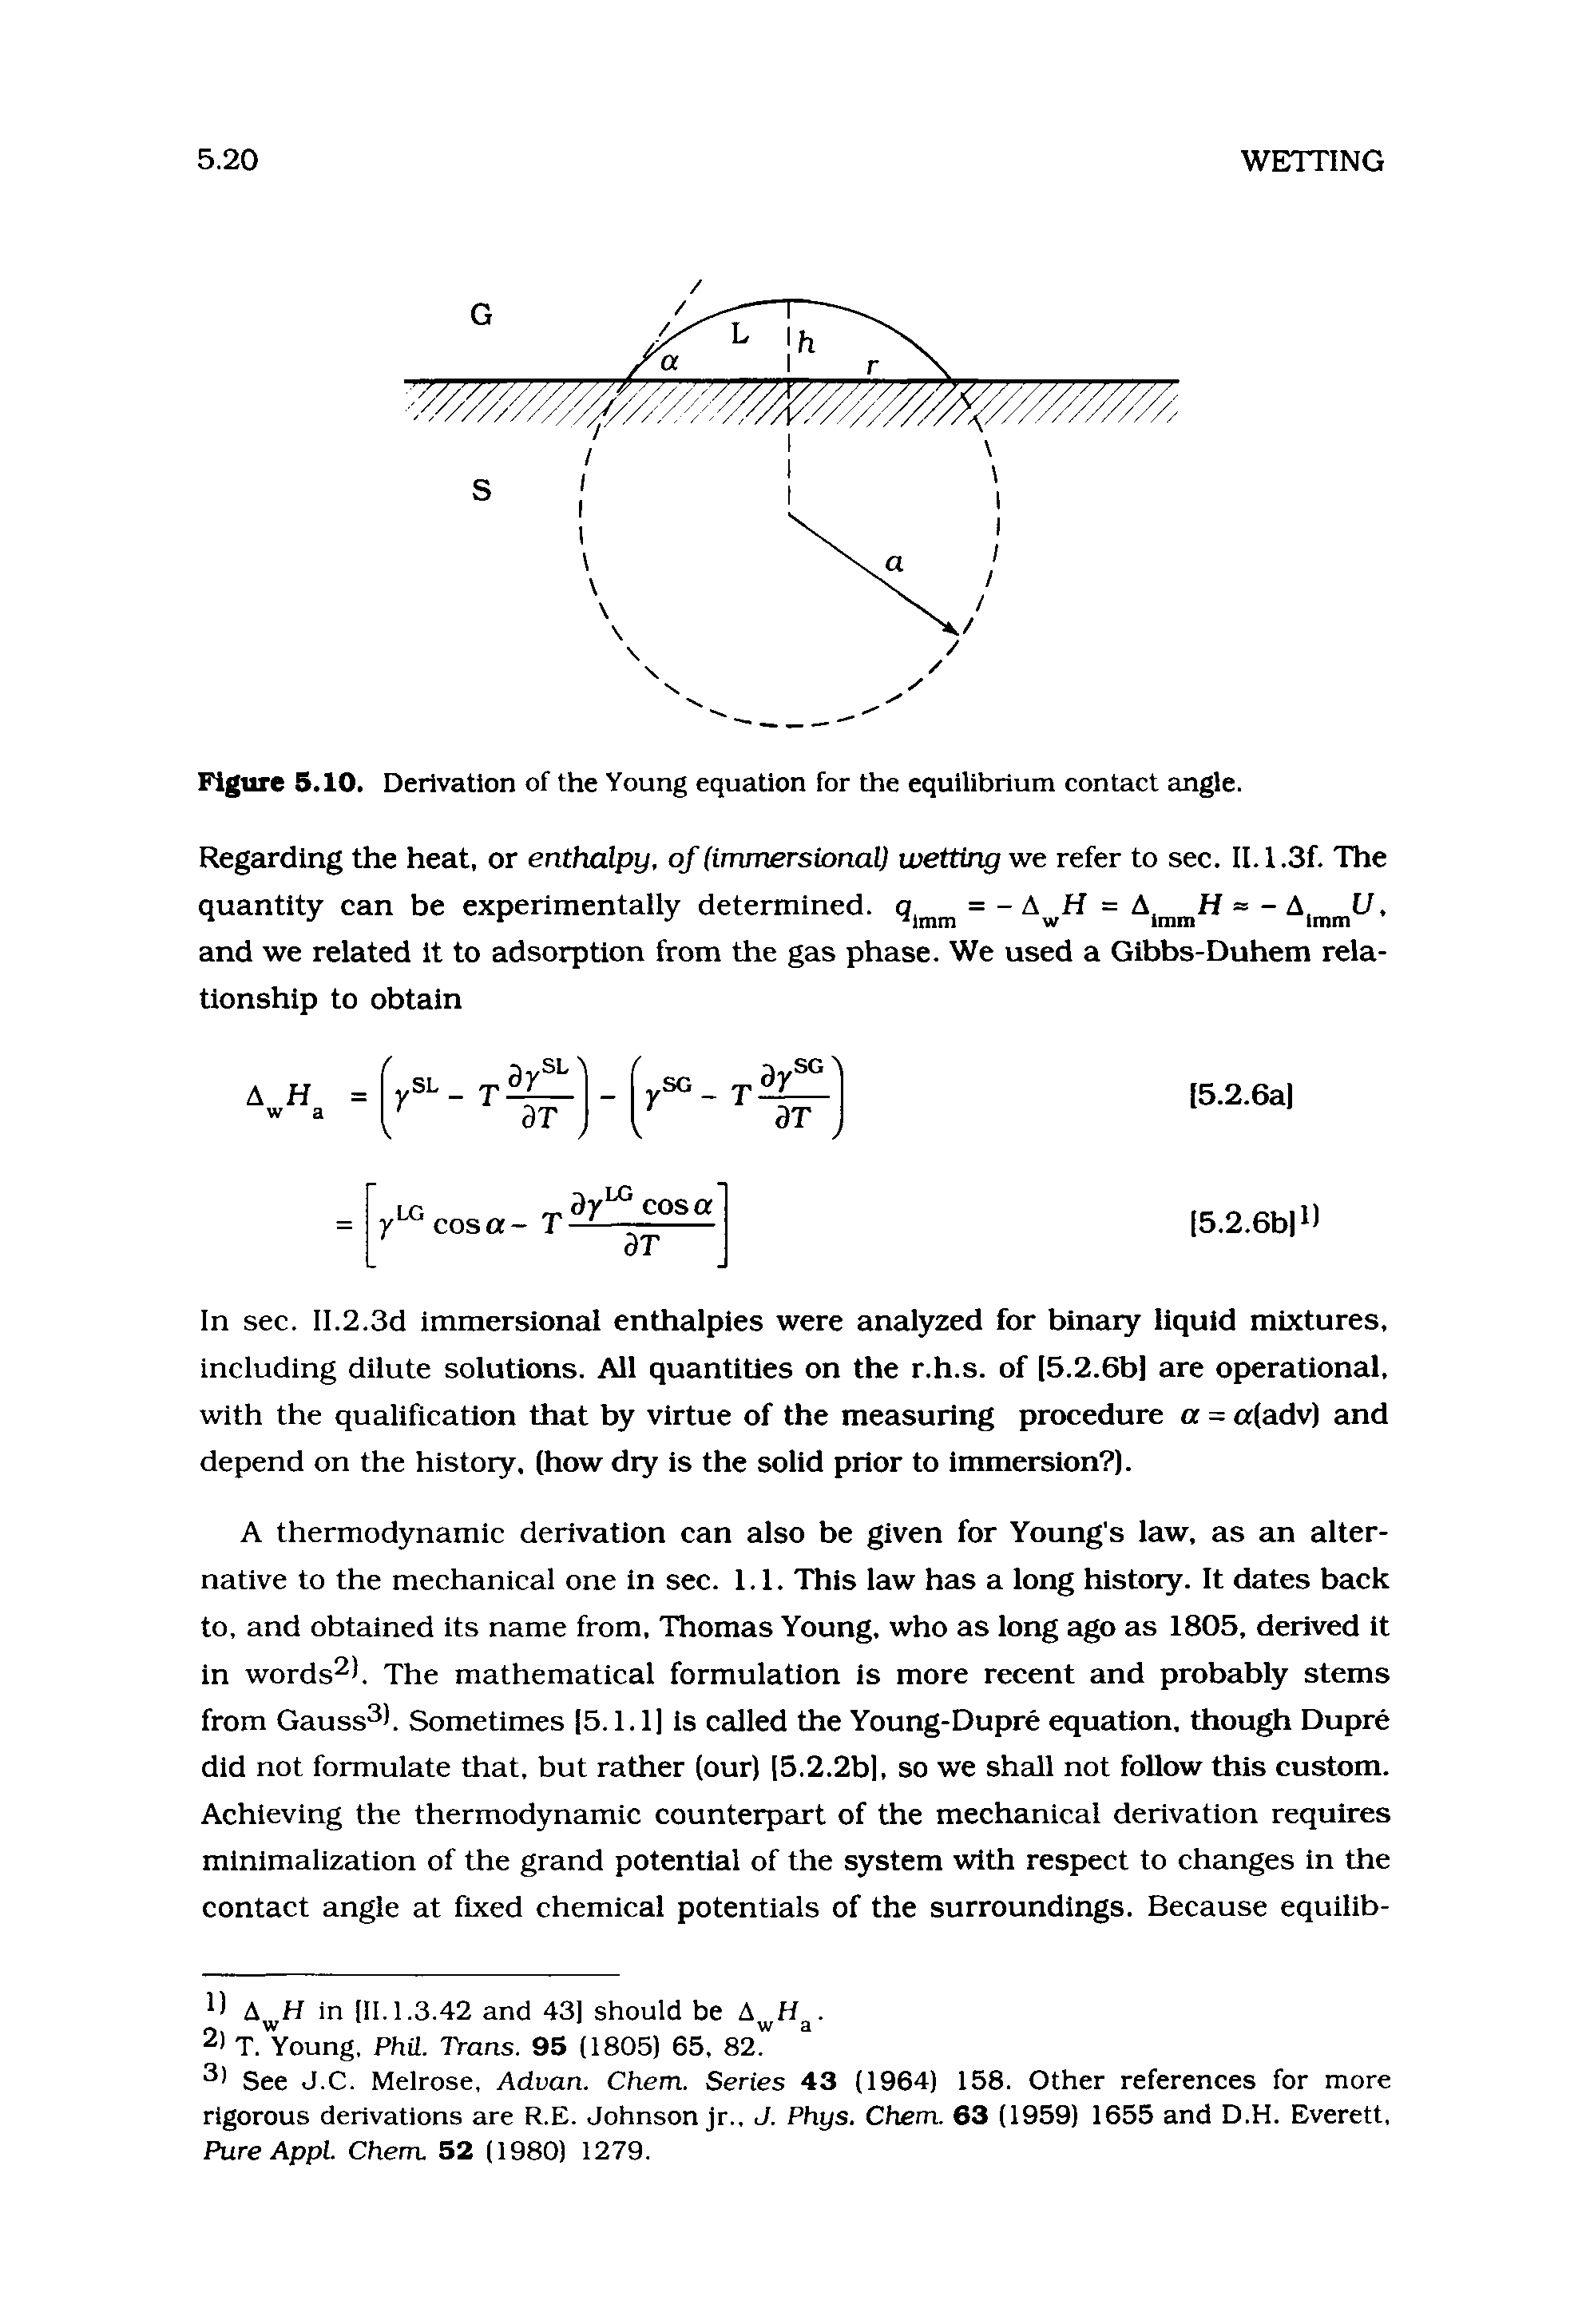 Figure 5.10. Derivation of the Young equation for the equilibrium contact angle.